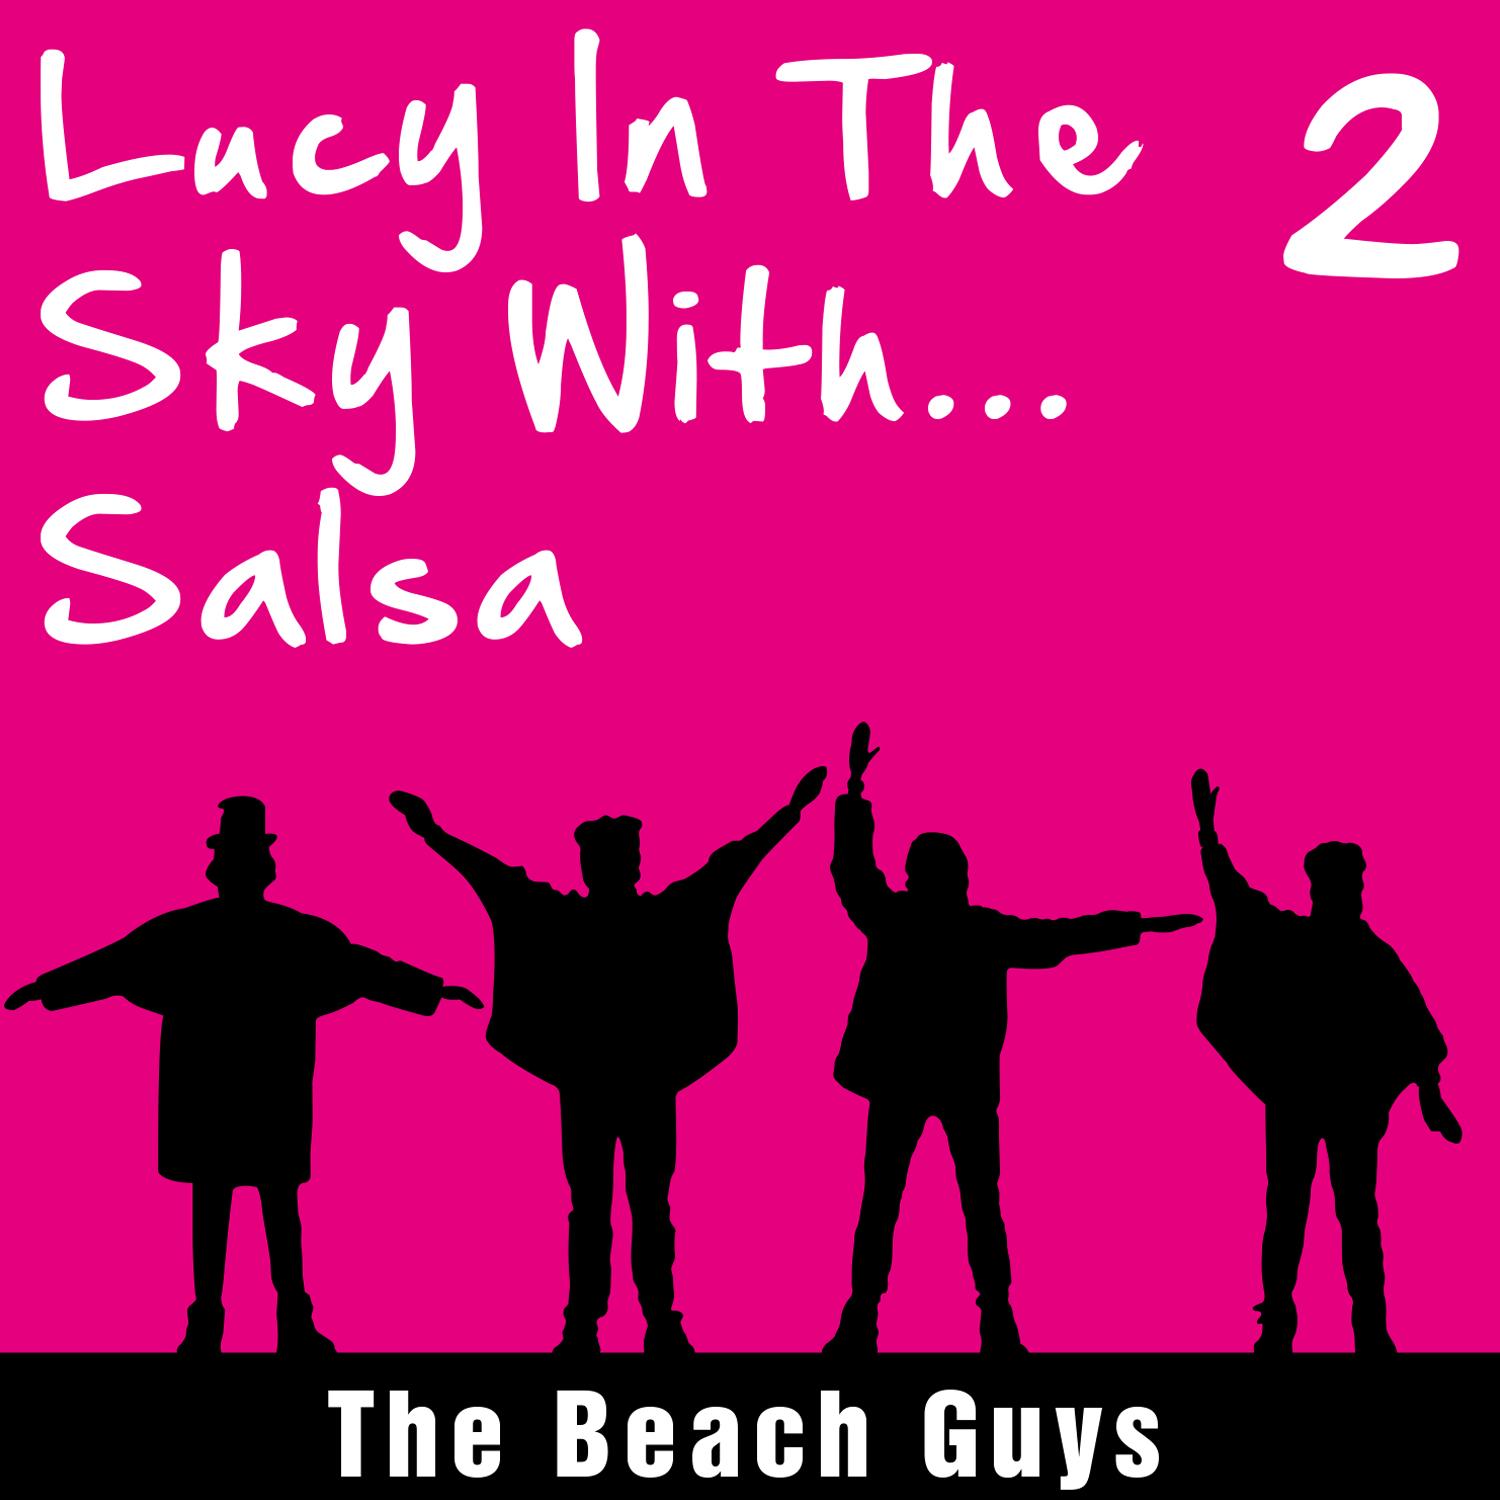 Lucy in the Sky With... Salsa, Vol. 2